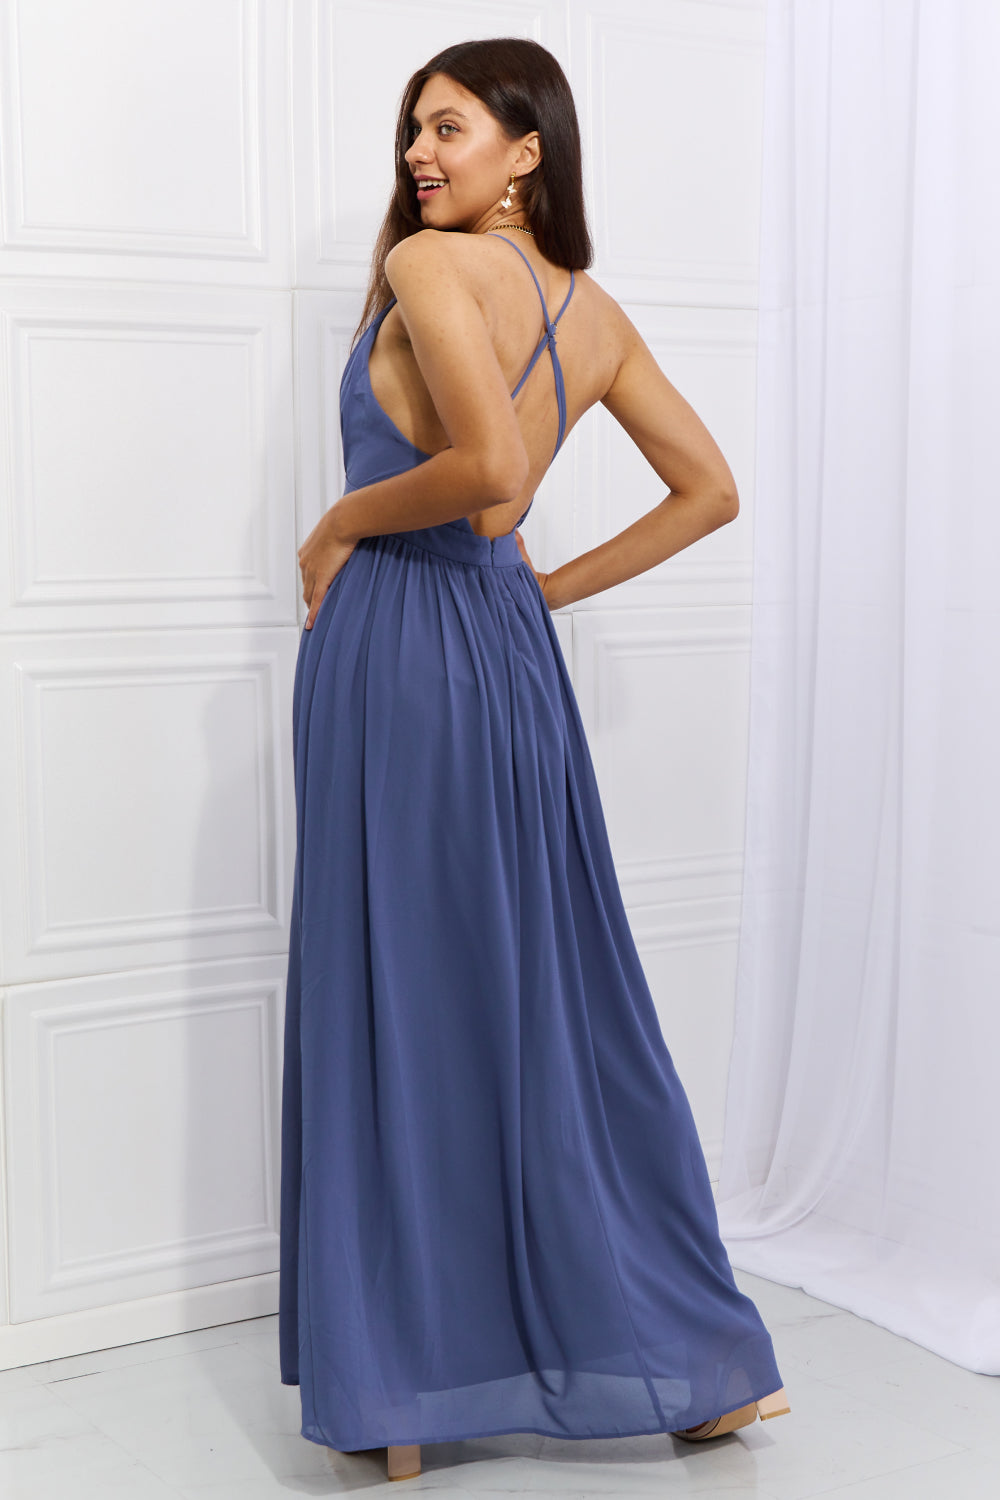 WE ARE THE MUSES CROSSBACK MAXI DRESS